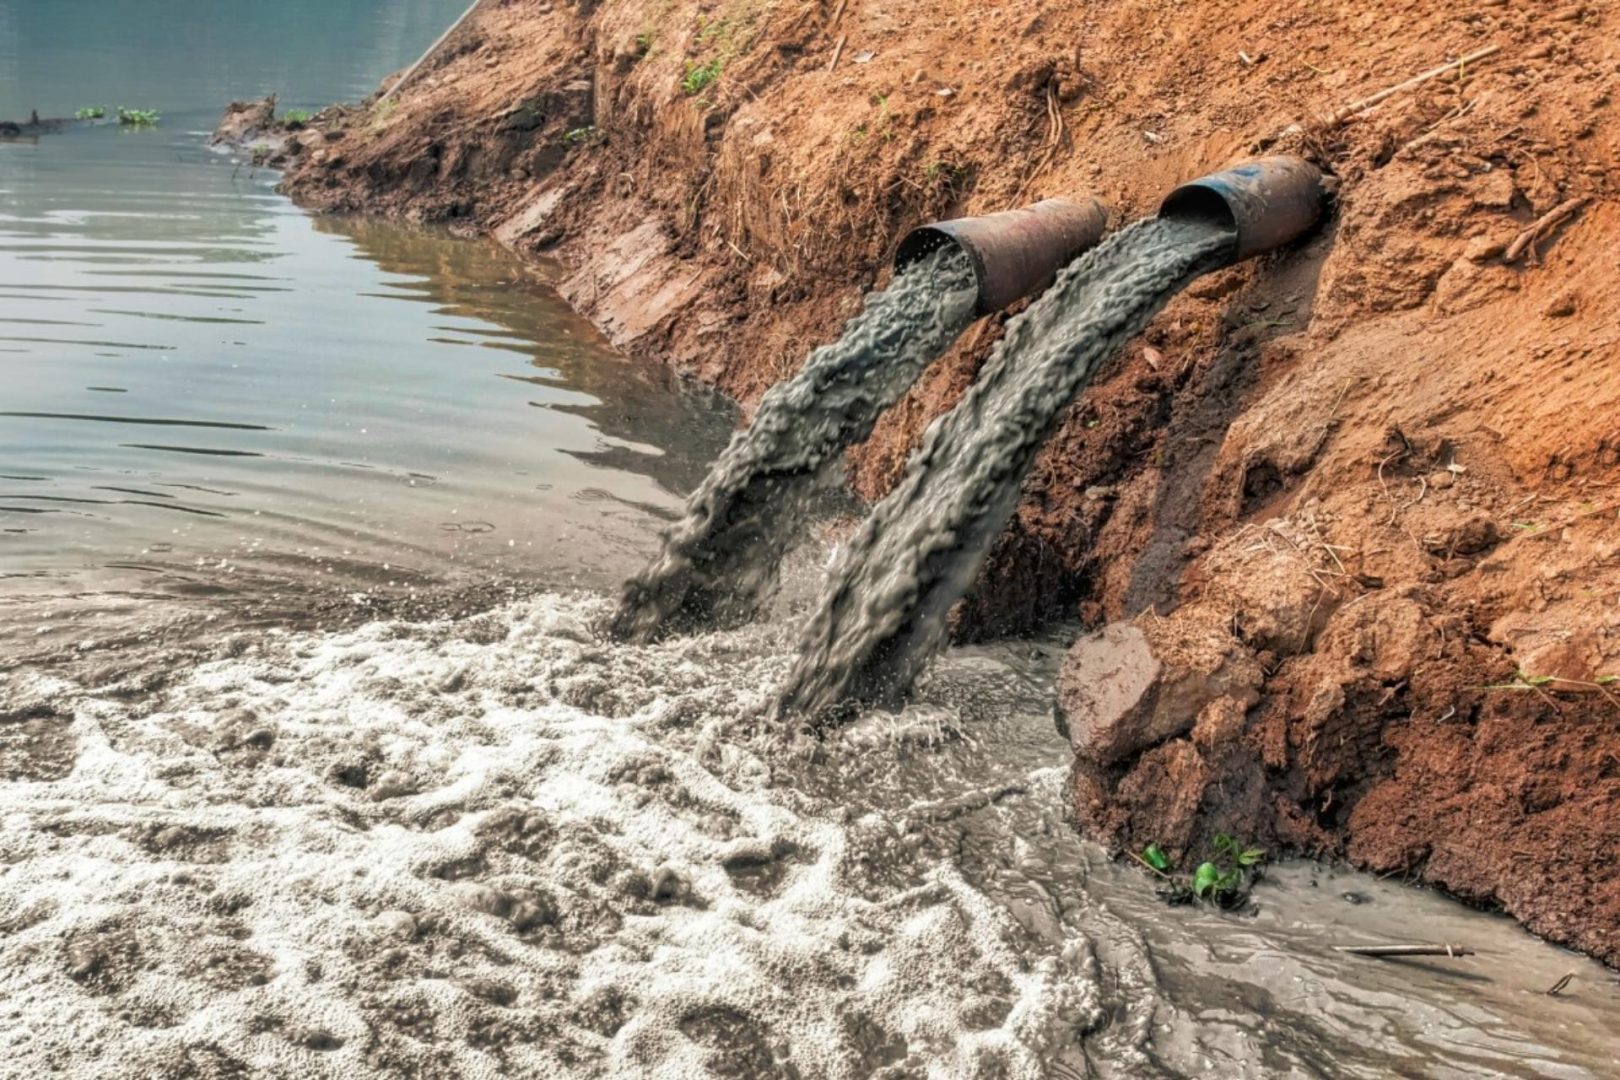 Two pipes sticking out of land, spilling muddy and murky liquid into a body of water.